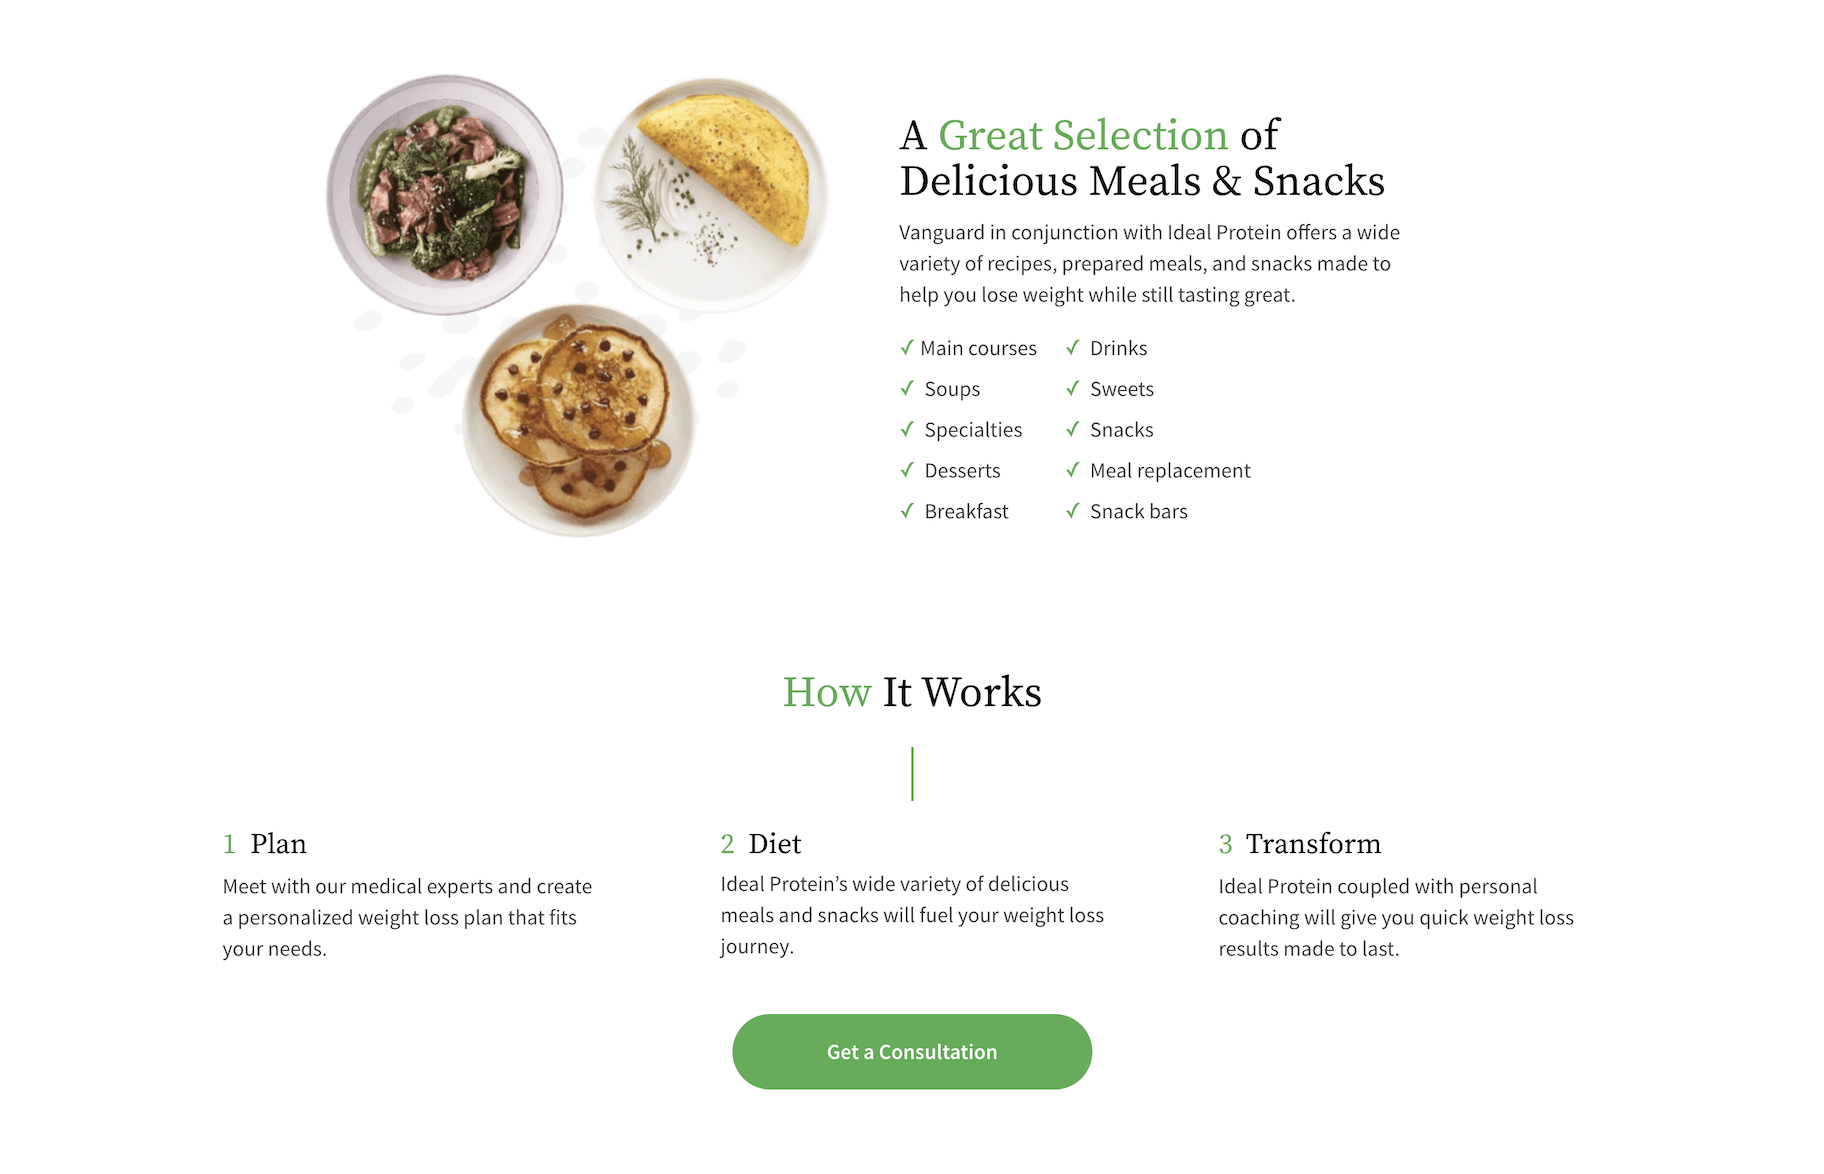 Weight loss clinic landing page example - product and process